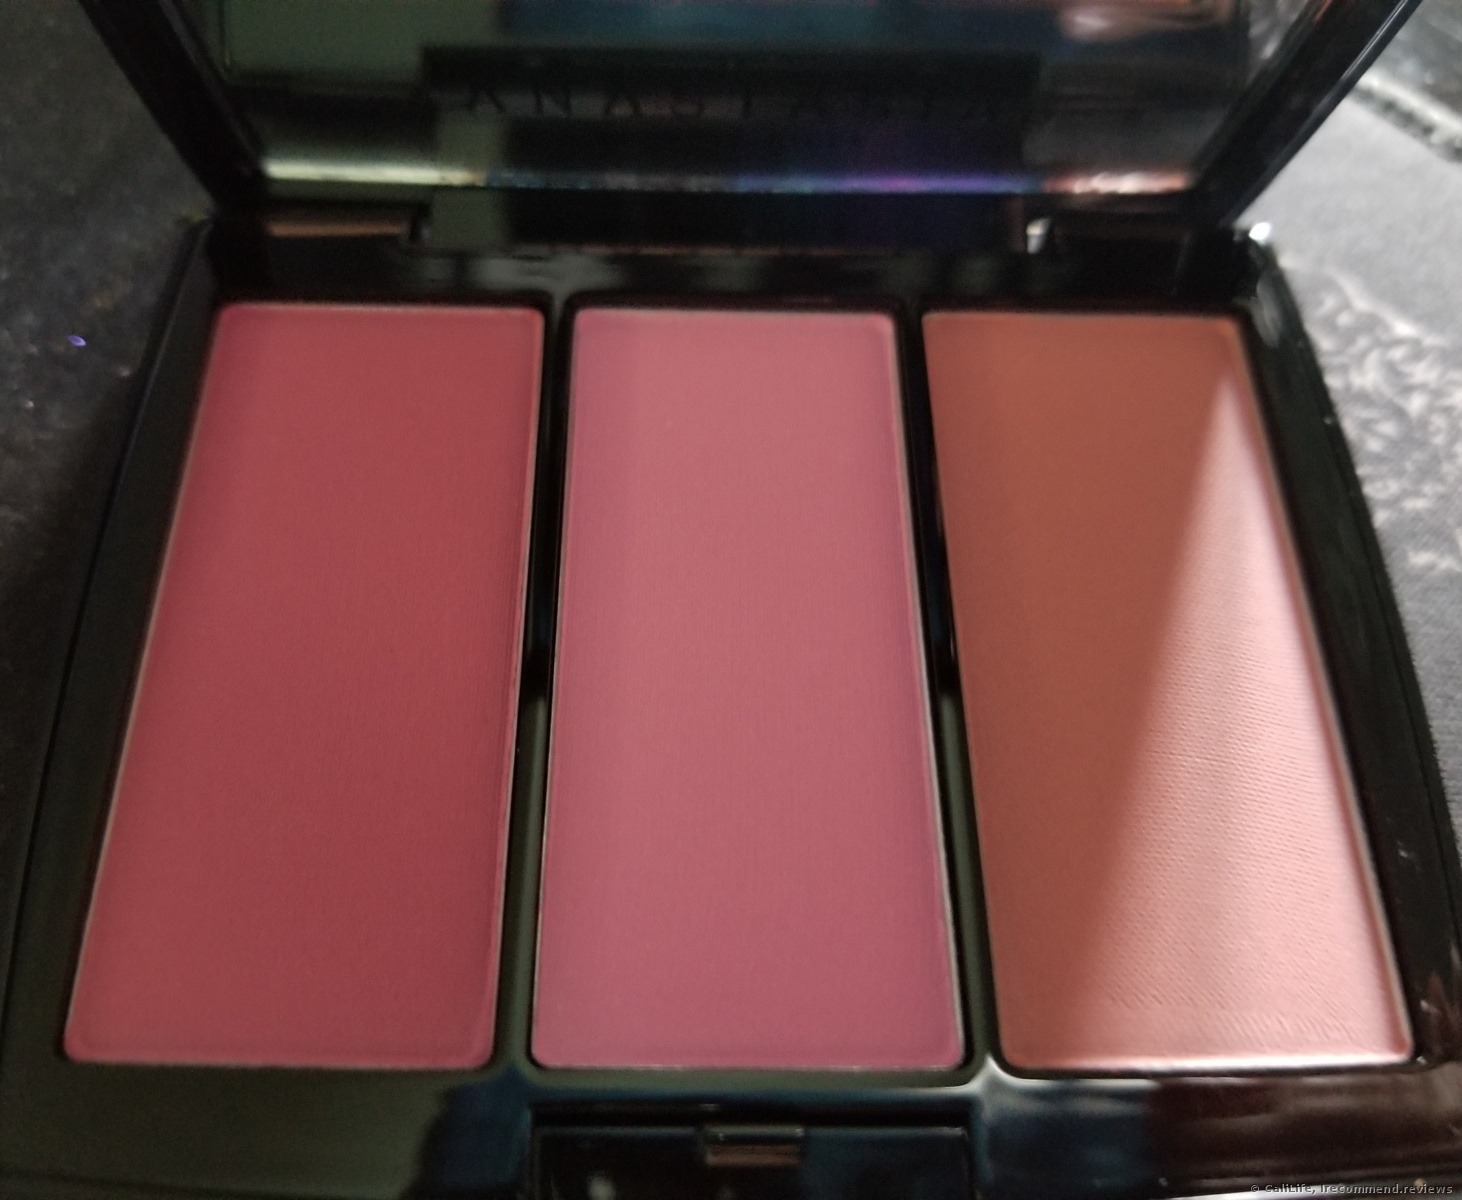 - is » in Anastasia product «The which Beverly the Anastasia The Pink | Consumer new your shade Trio palette worth attention. from Hills Passion. reviews Blush